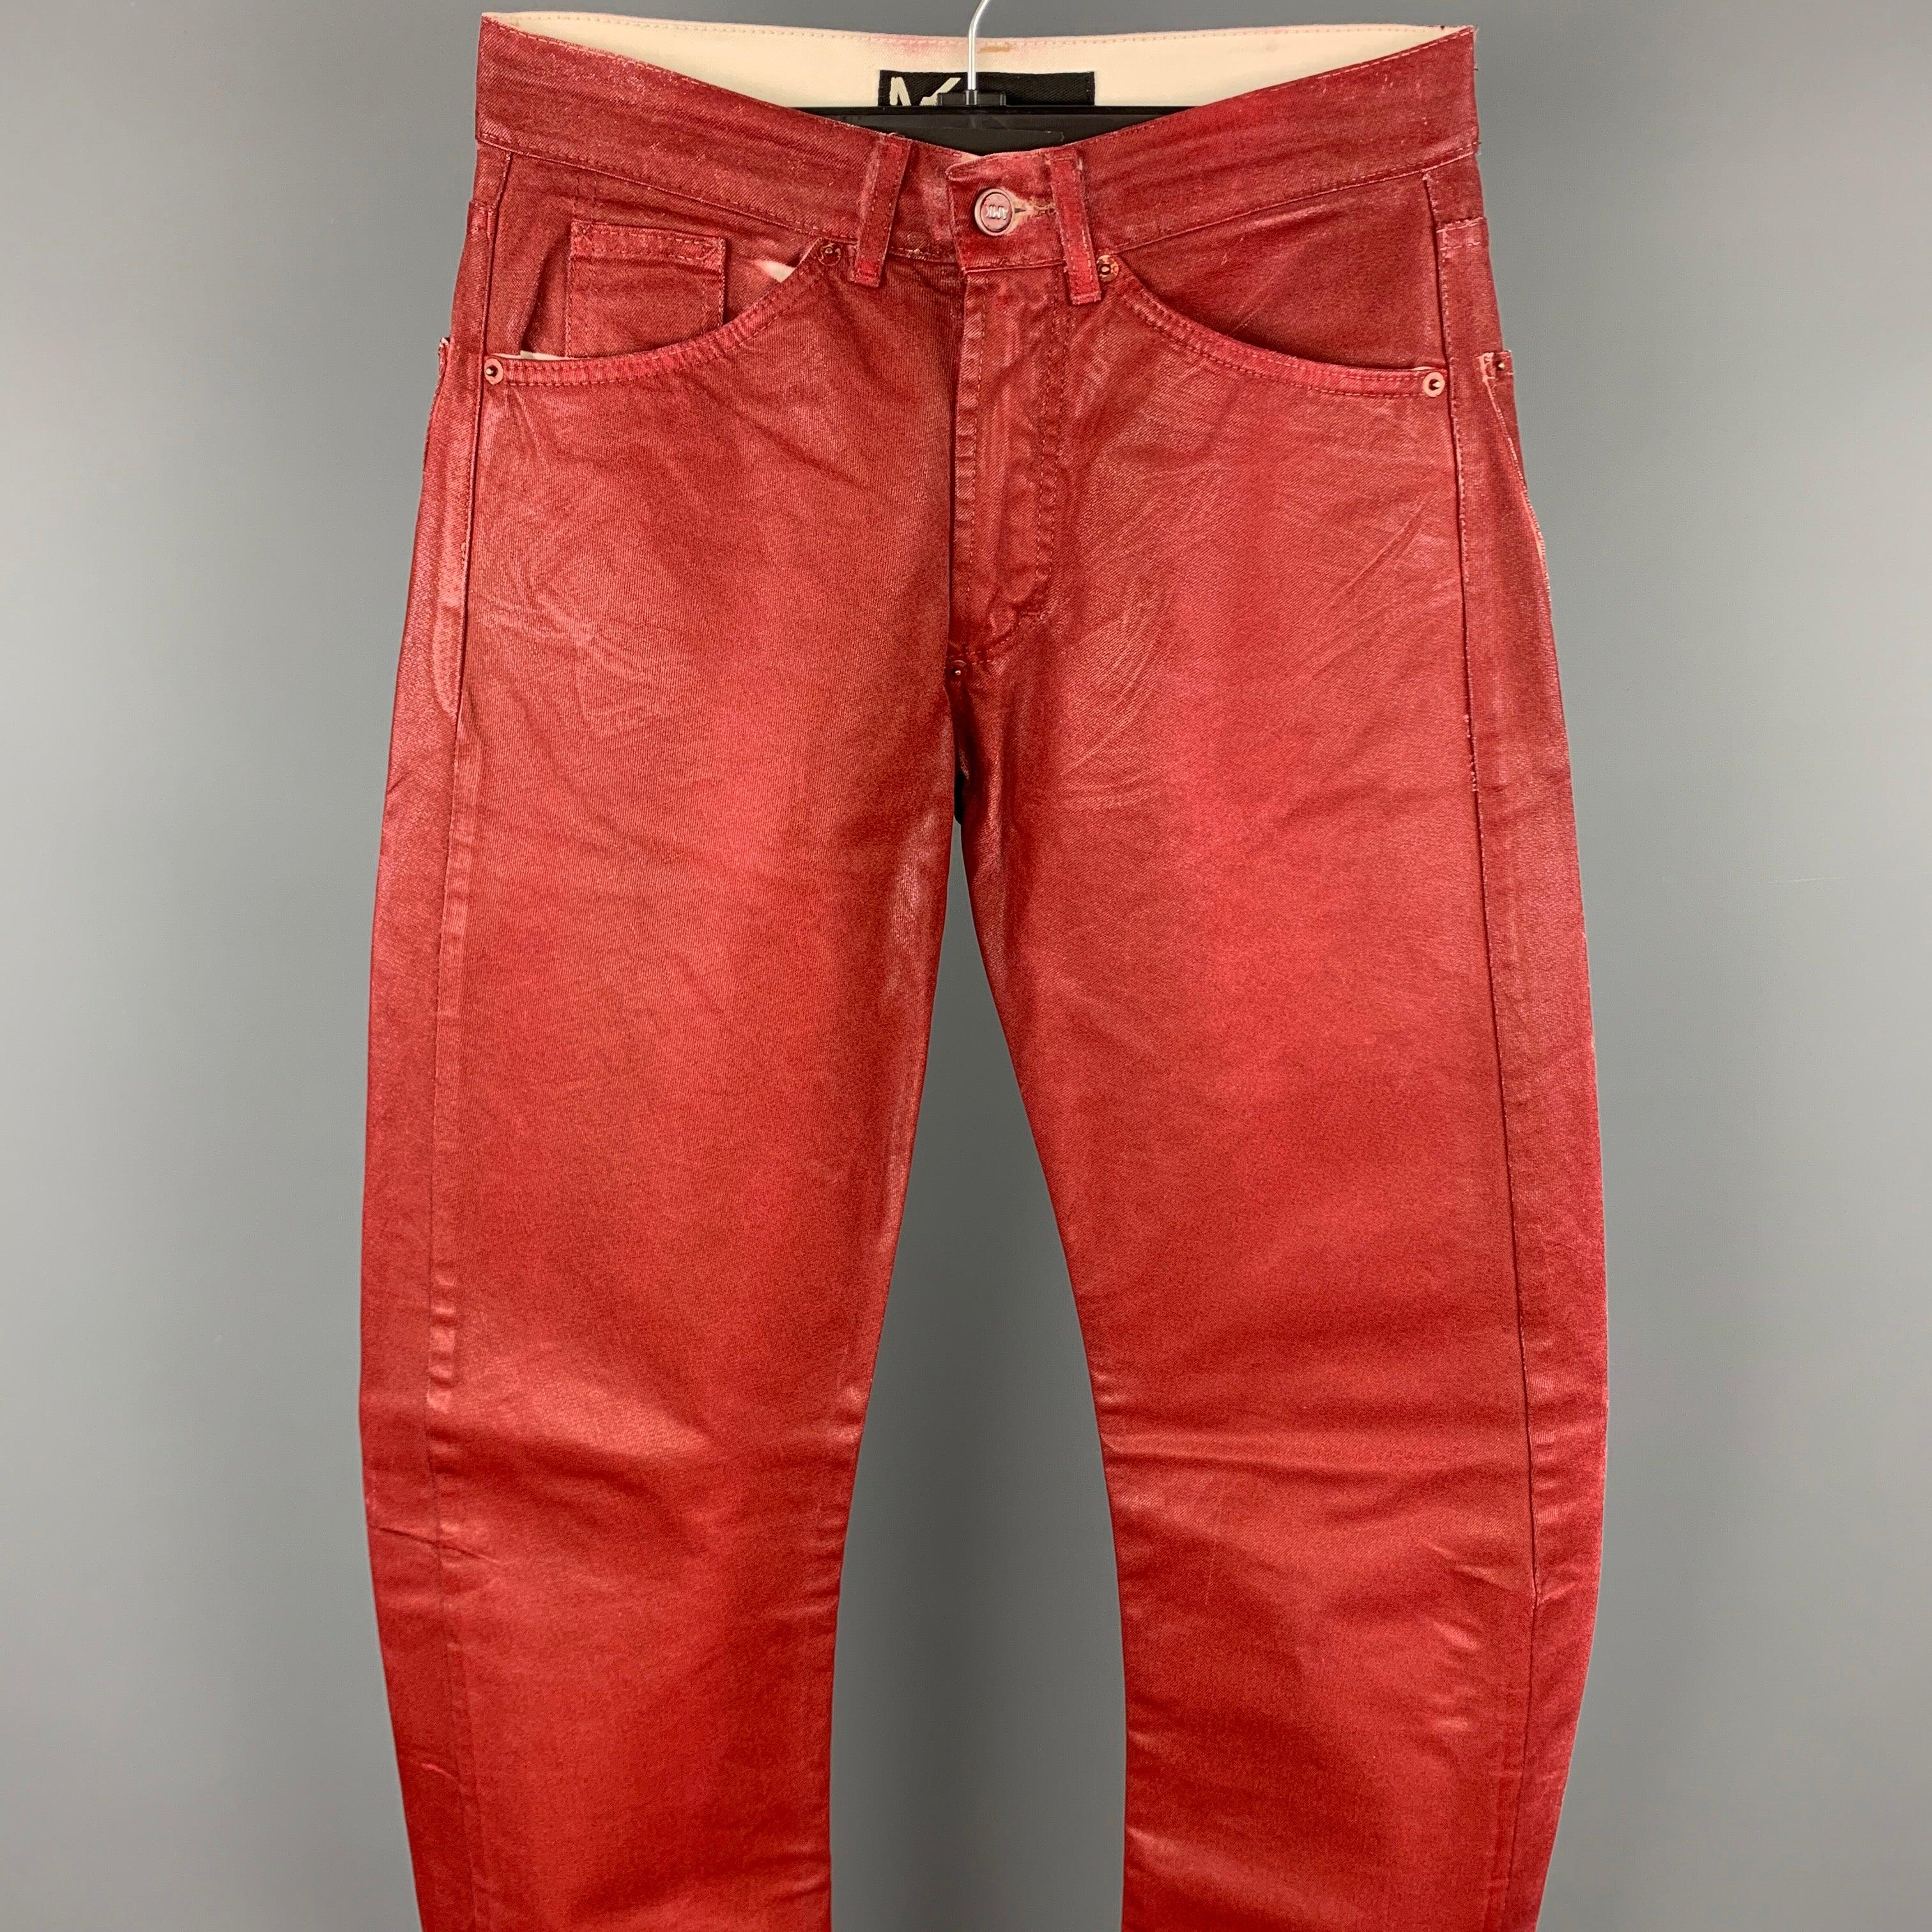 ANDREW MACKENZIE jean comes in a red coated denim featuring a curved leg style and a zip fly. Made in Italy.Very Good Pre-Owned Condition. 
 

 Marked:  IT 44 
 

 Measurements: 
  Waist: 27 inches Rise: 9.5 inches Inseam: 32.5 inches  
  
  
  
